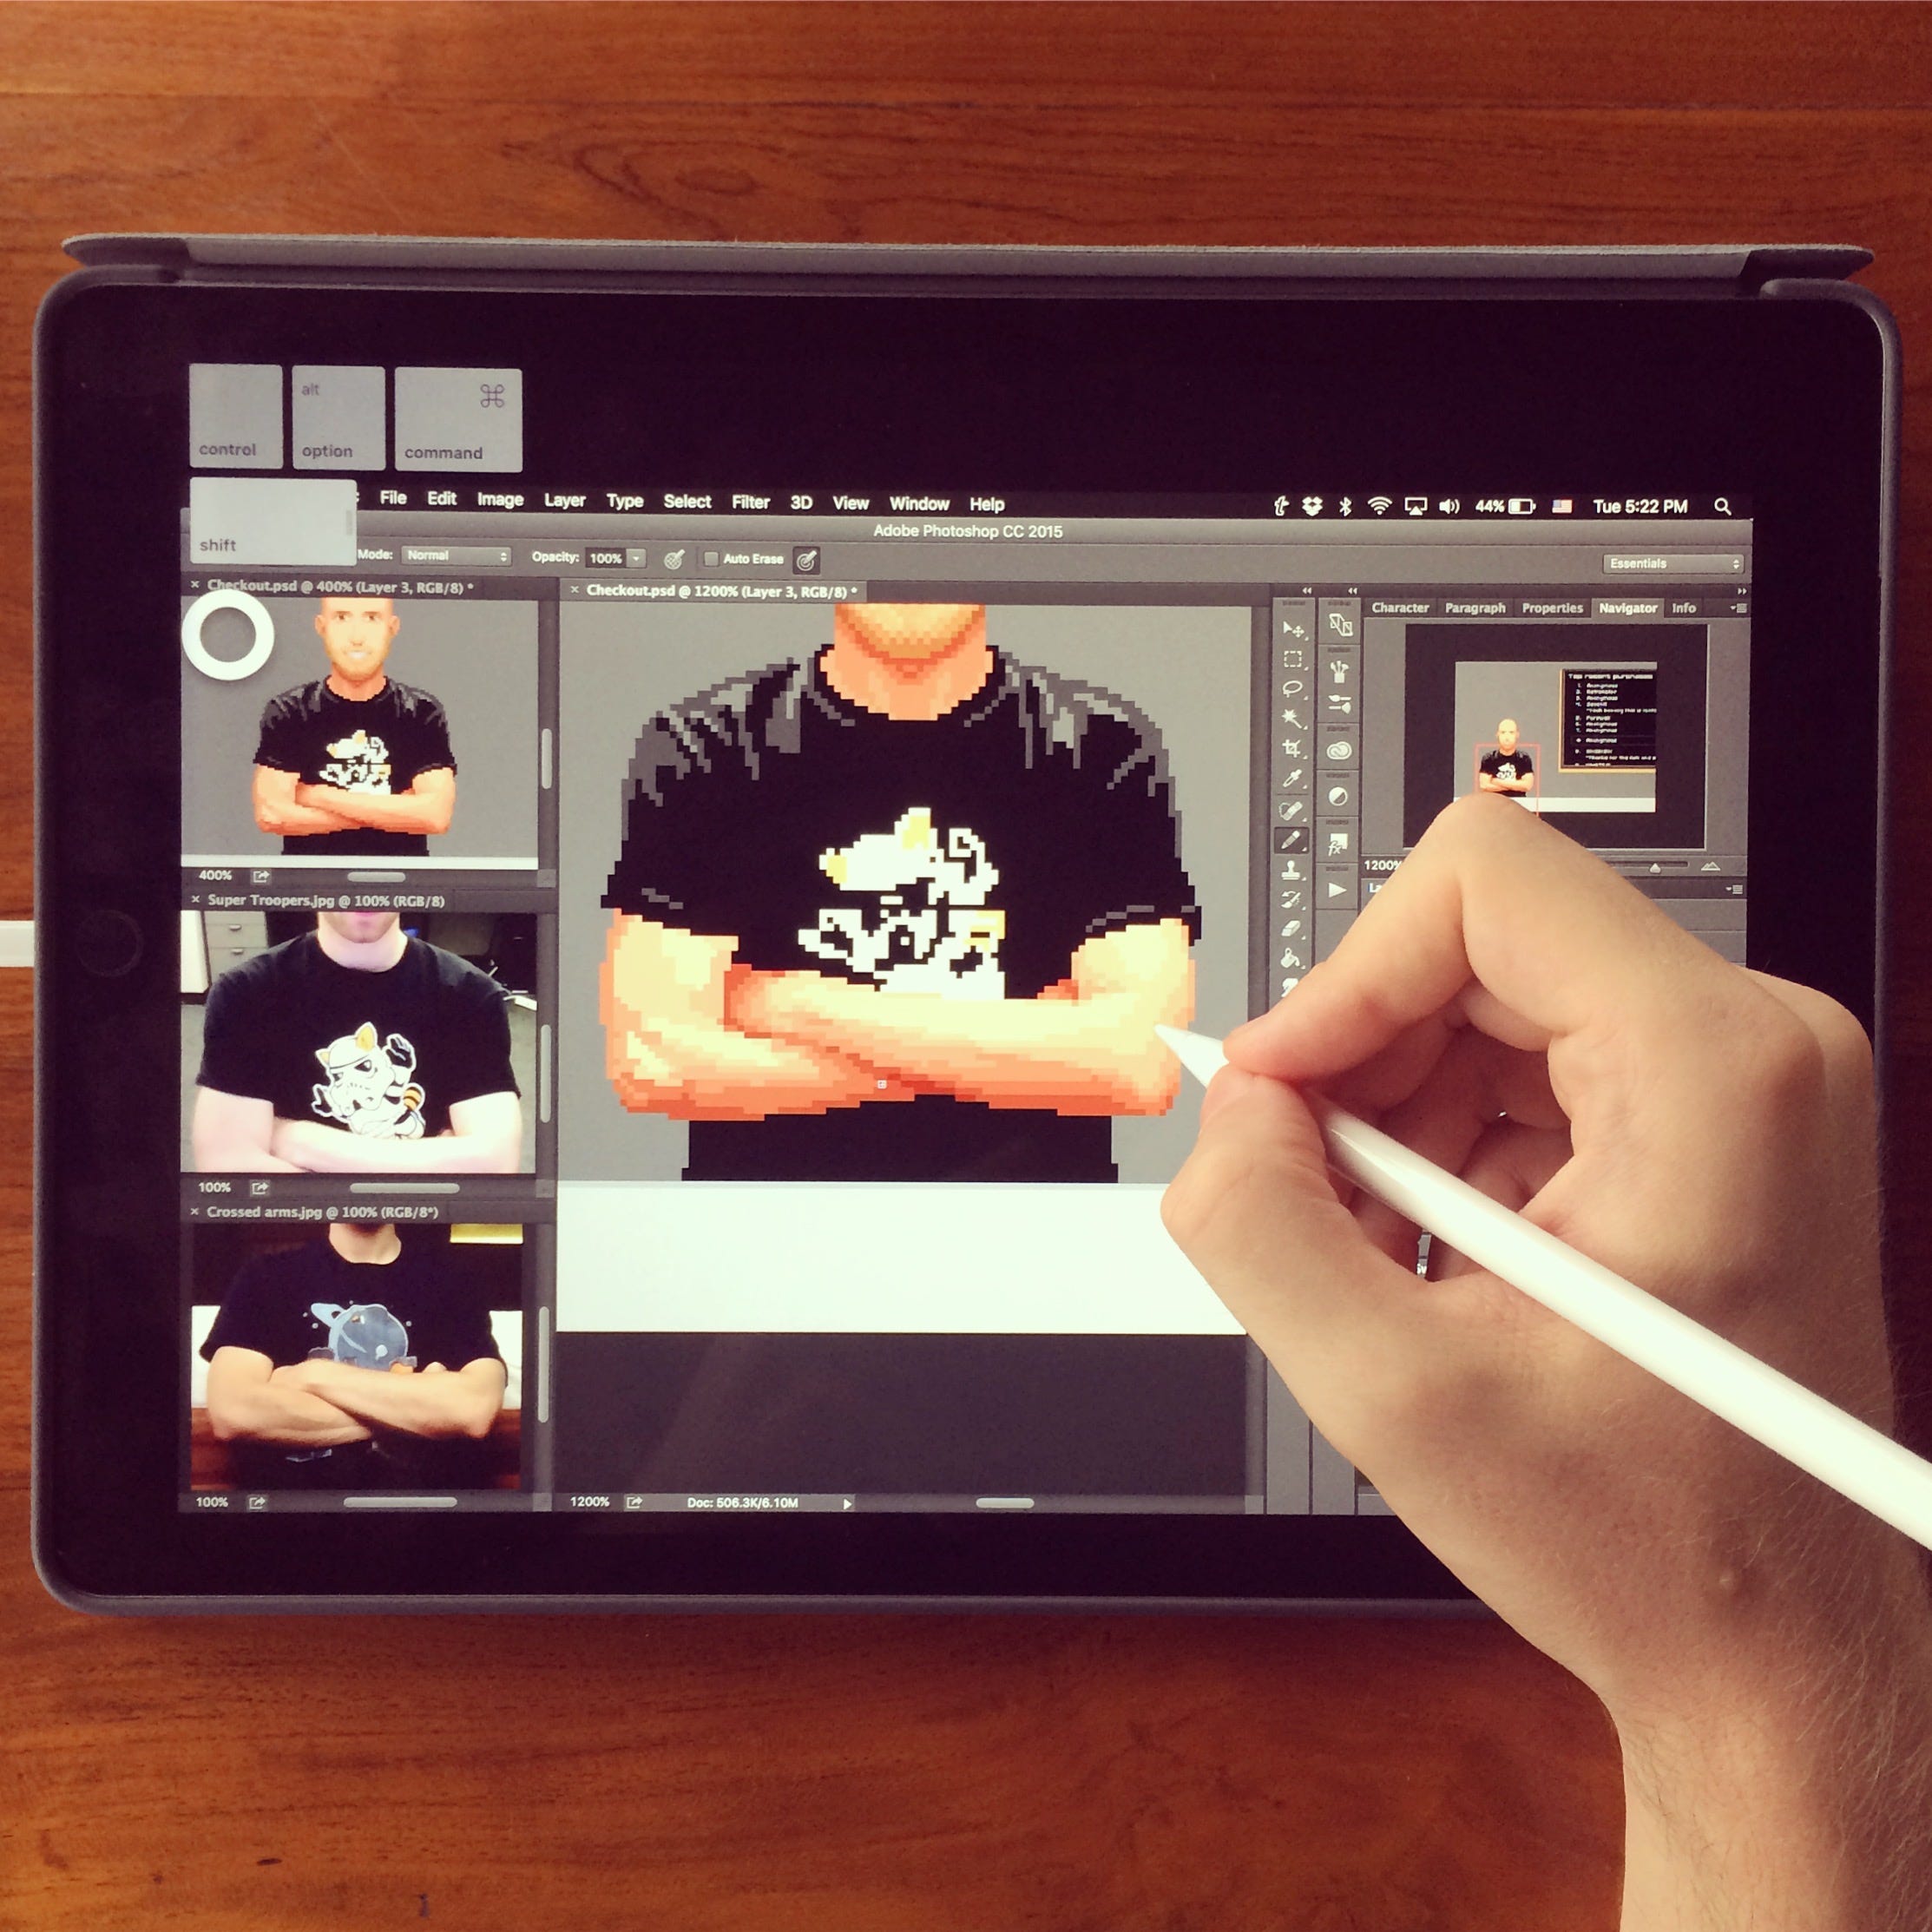 Life with the iPad Pro and Apple Pencil | by Matej 'Retro' Jan | Practical  Pixels | Medium